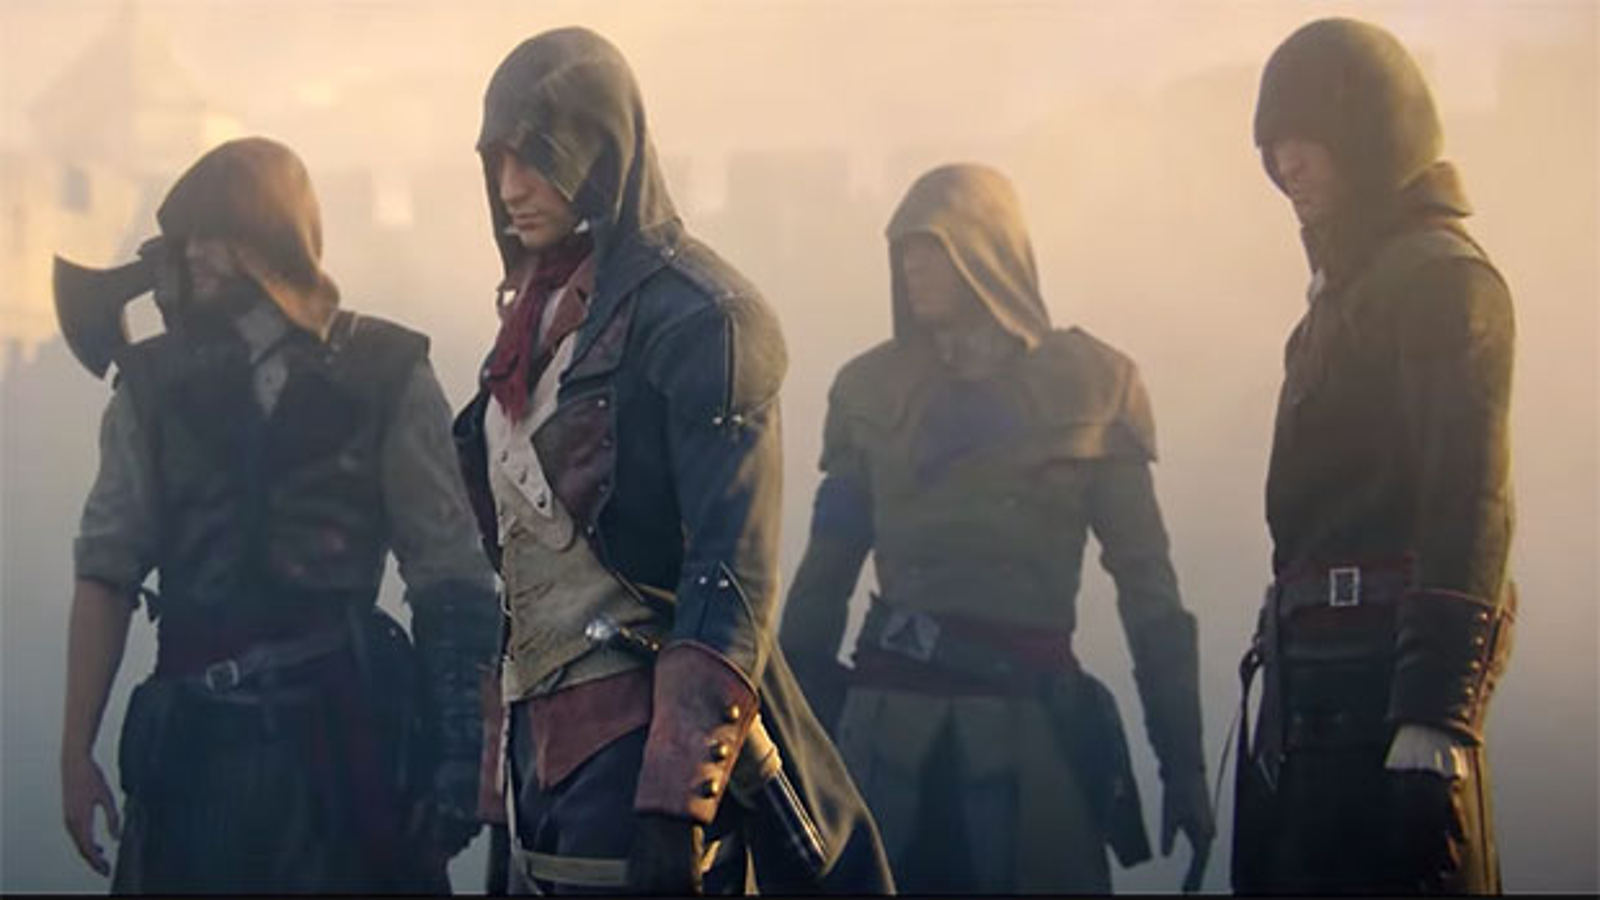 My contribution while on Assassins Creed Unity character team